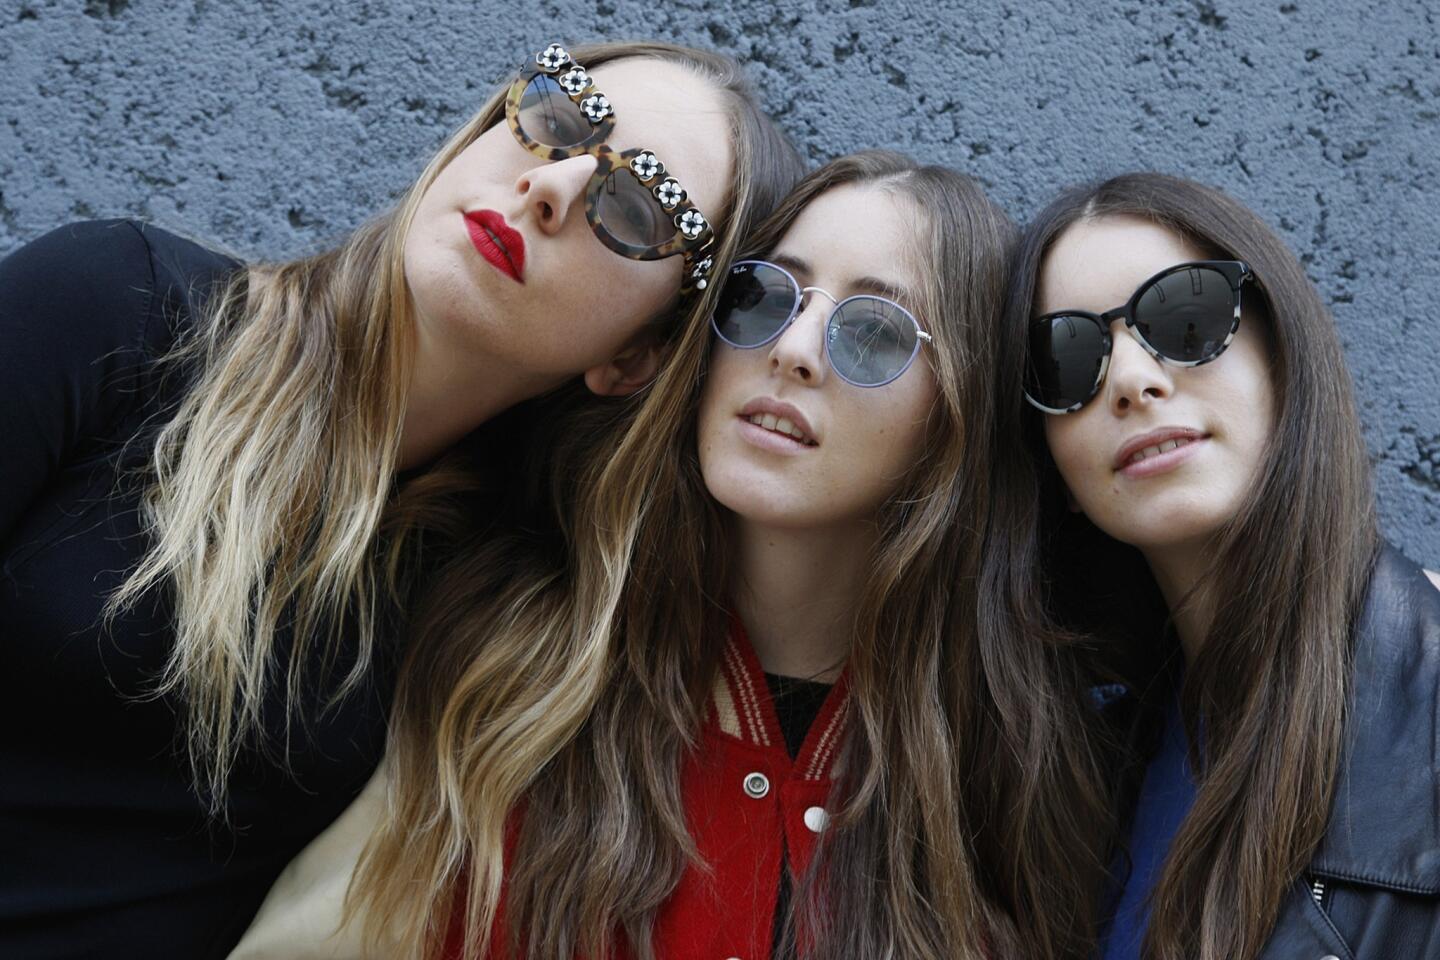 Meet Este, from left, Alana and Danielle of the L.A. group Haim. The three sisters with the long locks and voice chops give off a slinky pop vibe with splashes of rock and '90s R&B. Drummer Dash Hutton, formerly with Los Angeles bands Wires on Fire and Slang Chicken, also plays with the band. By Christy Khoshaba